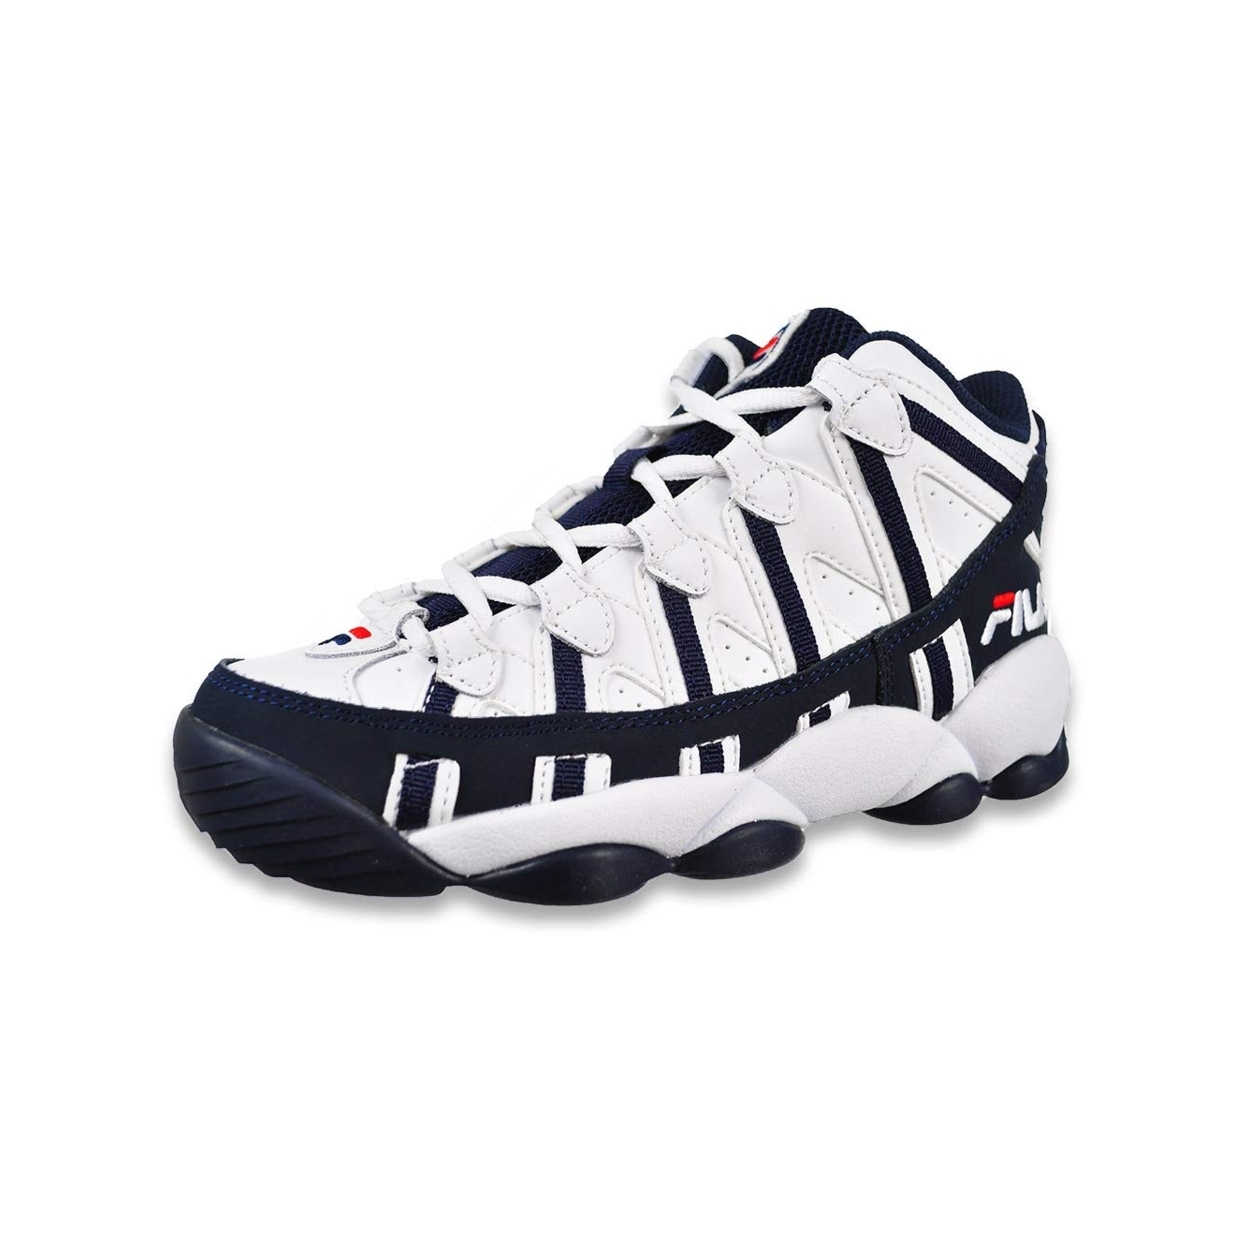 Fila Kids' Stackhouse Spaghetti Basketball Sneakers WHT/FNVY/FRED - WHT/FNVY/FRED, 6.5 Big Kid